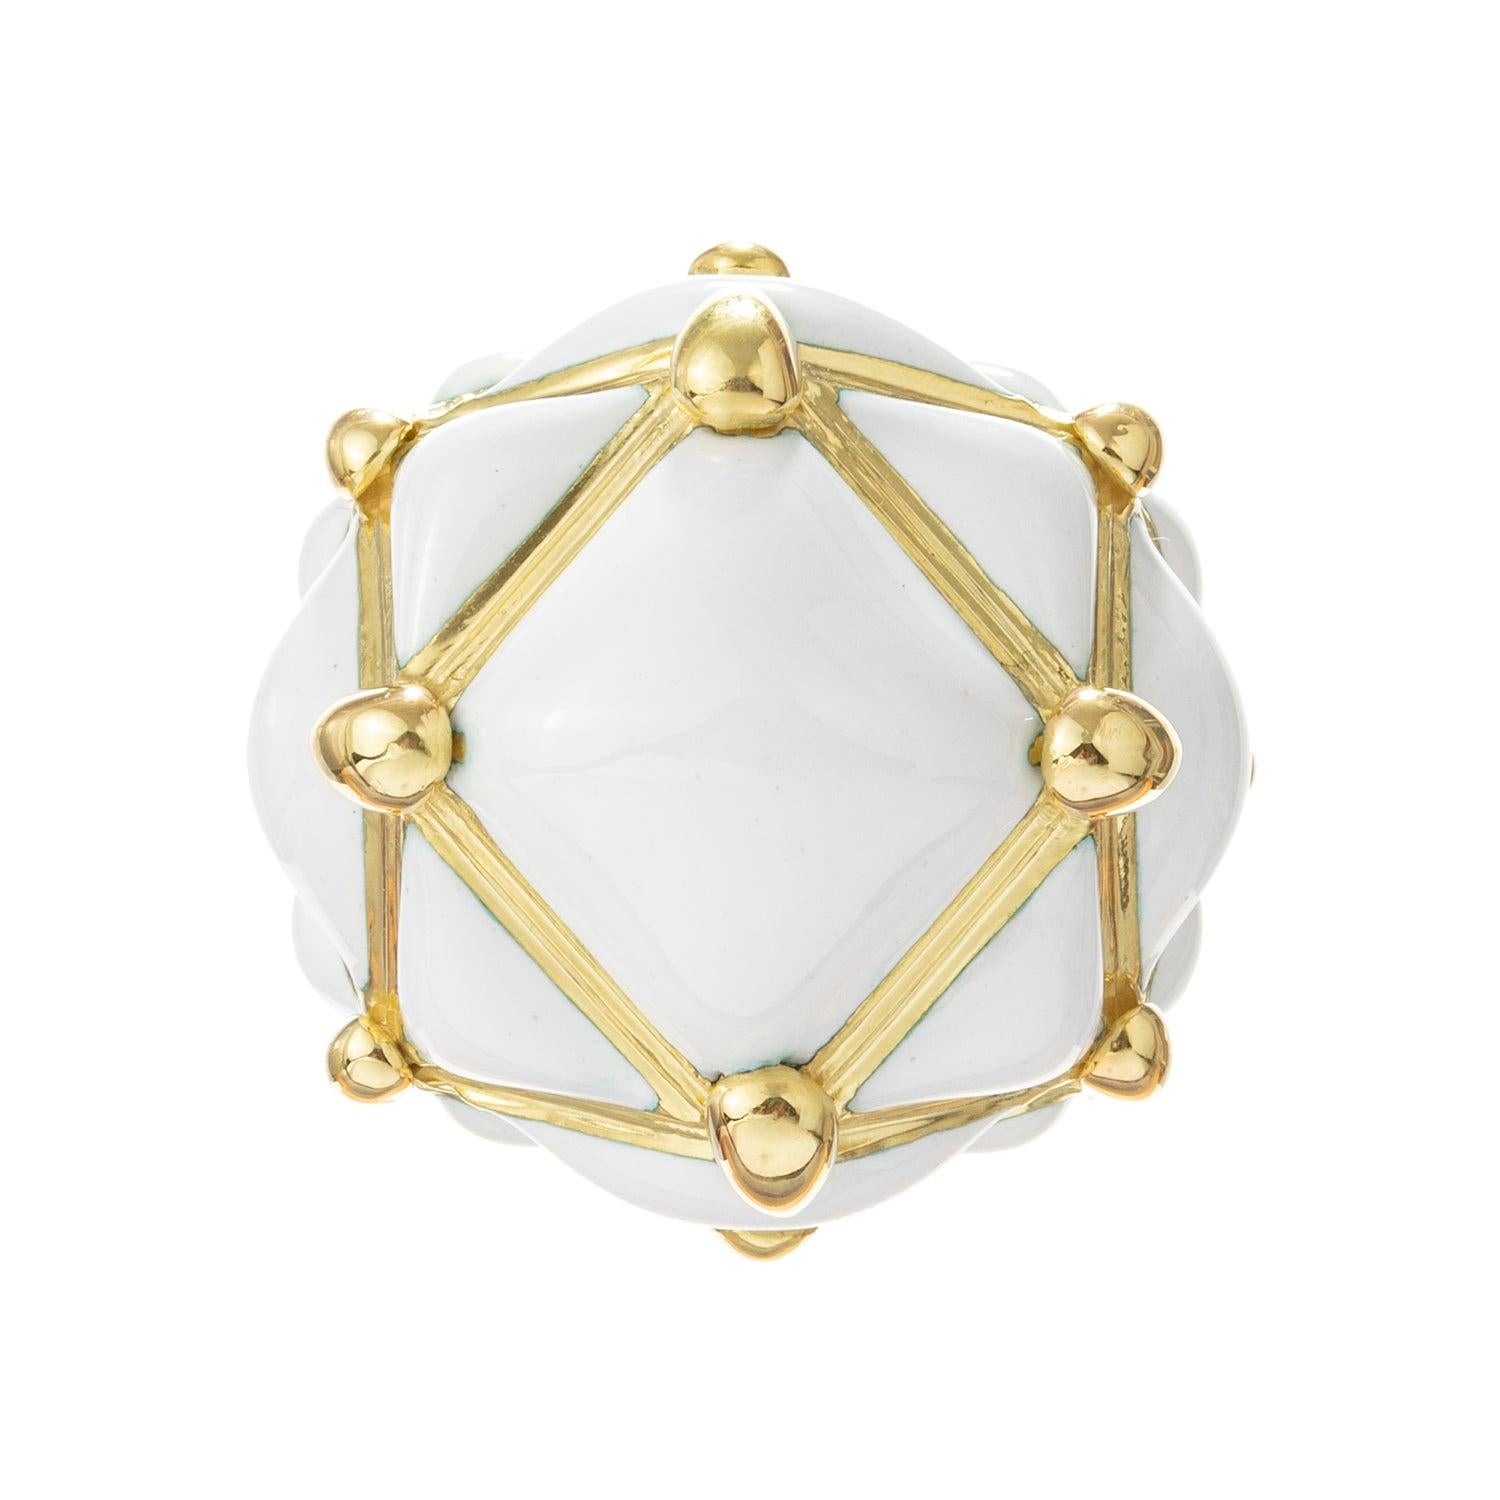 David Webb 18k Yellow Gold White Enamel Geodesic Dome Ring In Excellent Condition For Sale In Palm Beach, FL